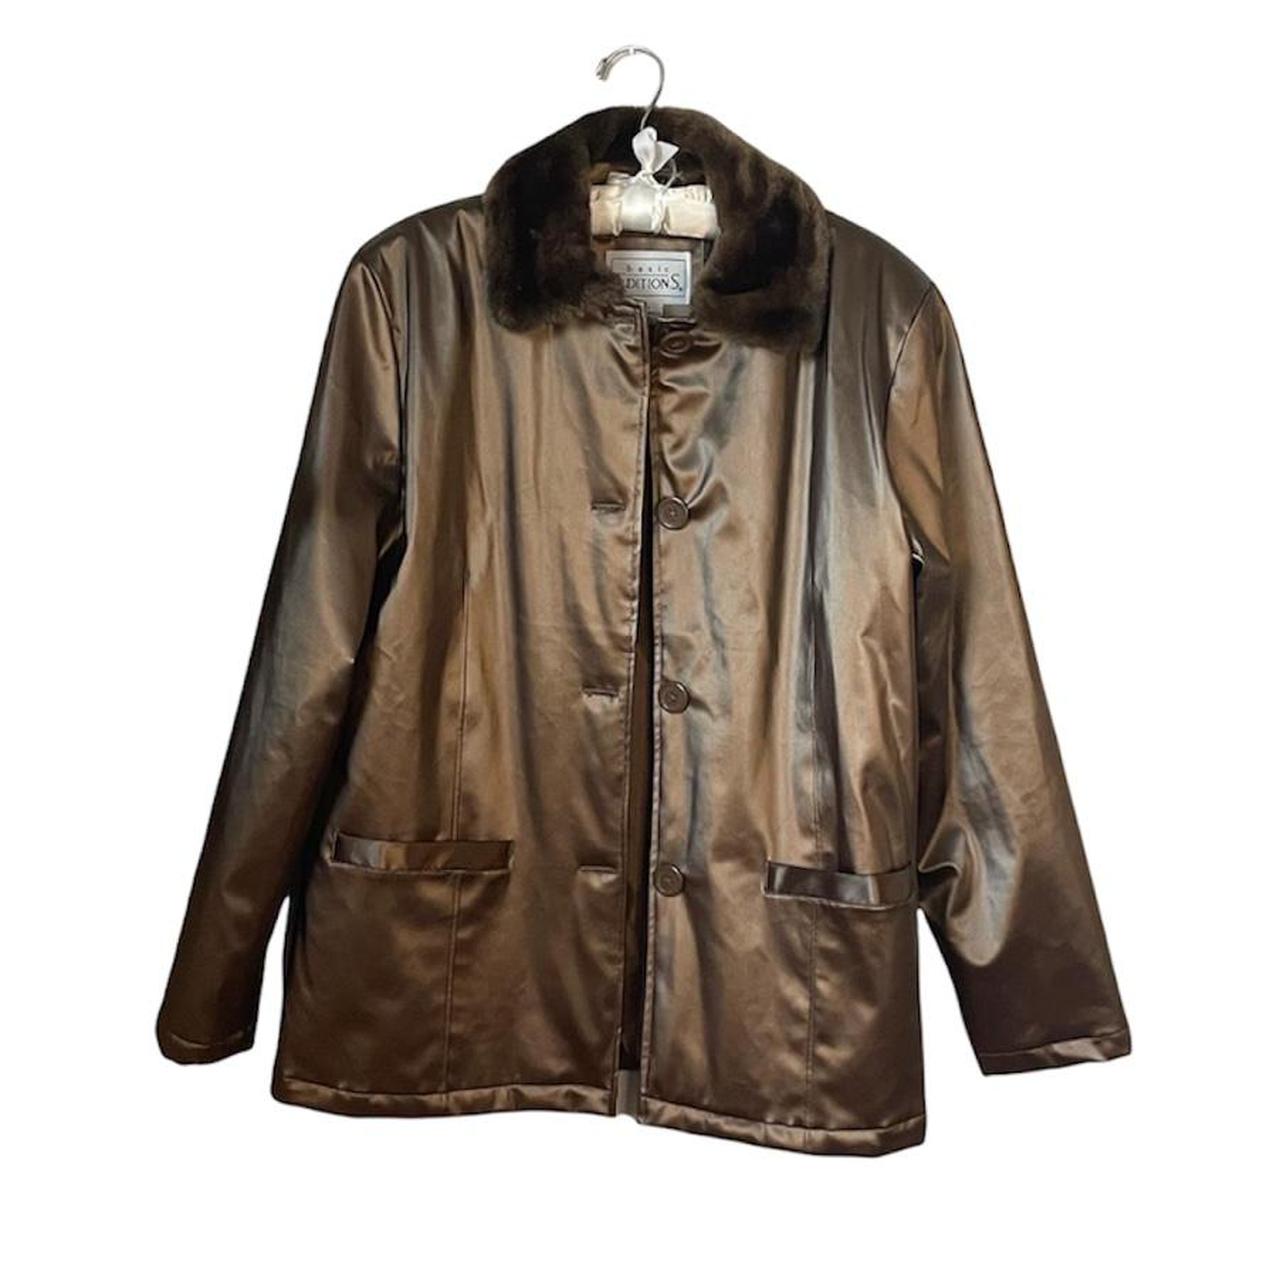 Basic Editions Women's Gold and Brown Coat